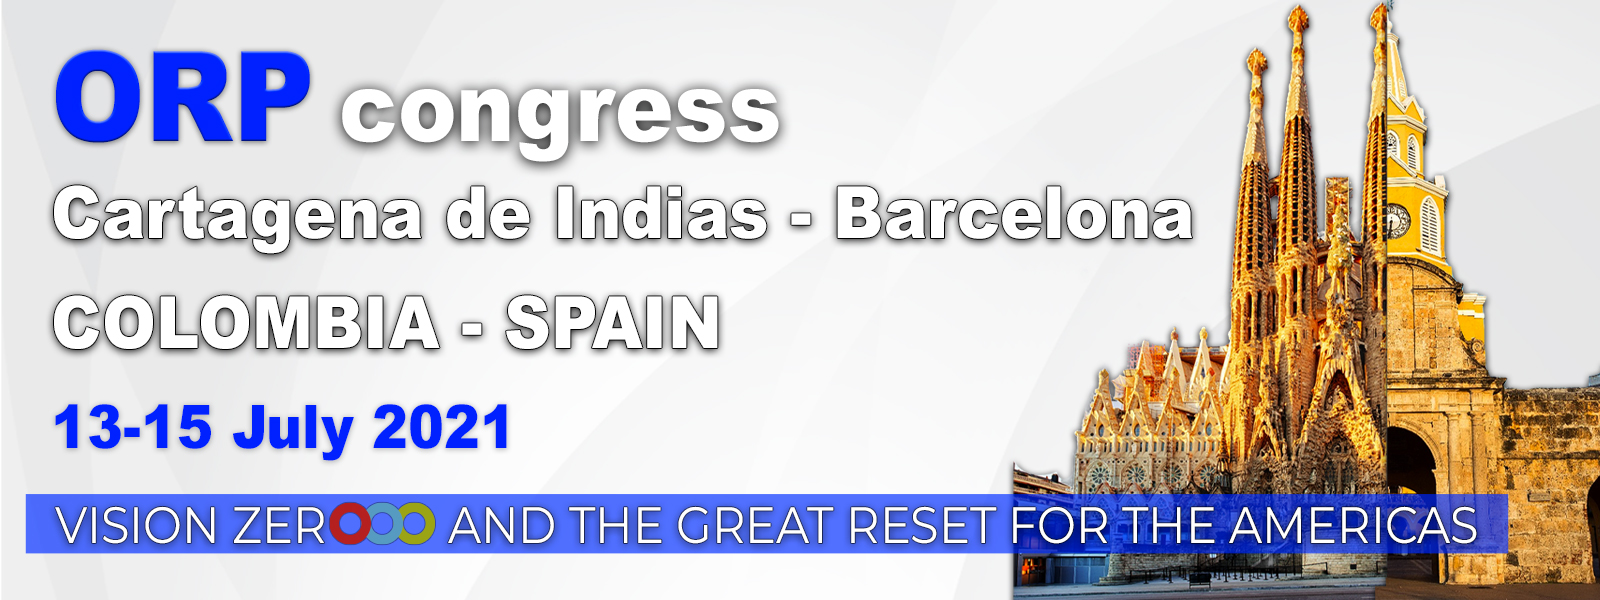 You are currently viewing Vision Zero and the Great Reset for The Americas | ORP Congress 13-15 July 2021